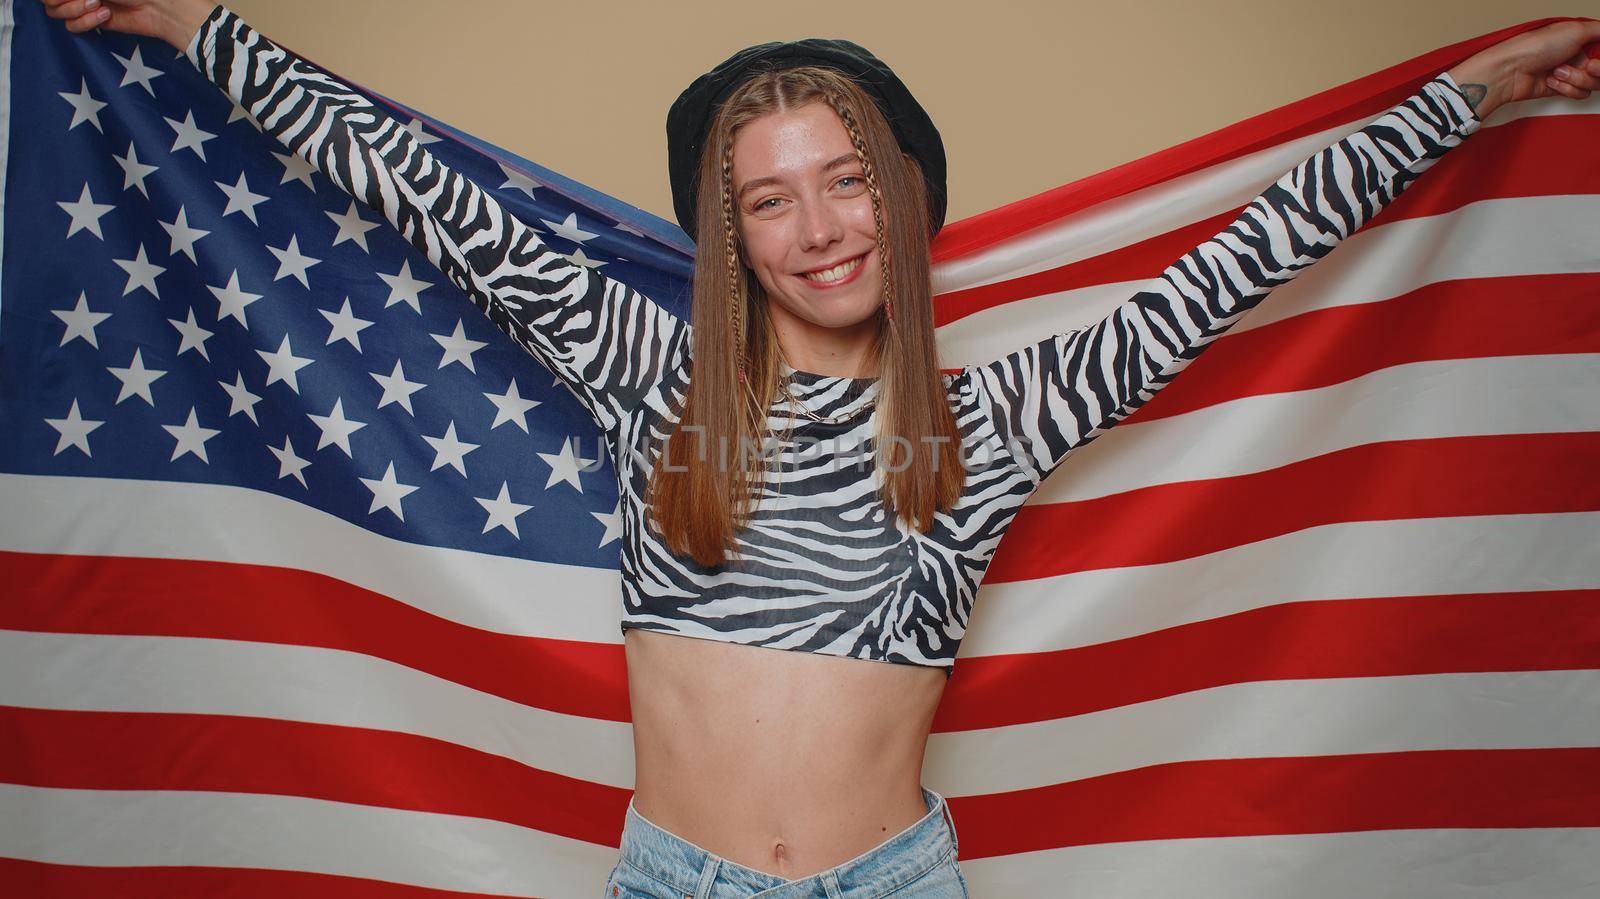 Lovely young woman waving and wrapping in American USA flag, celebrating, human rights and freedoms by efuror